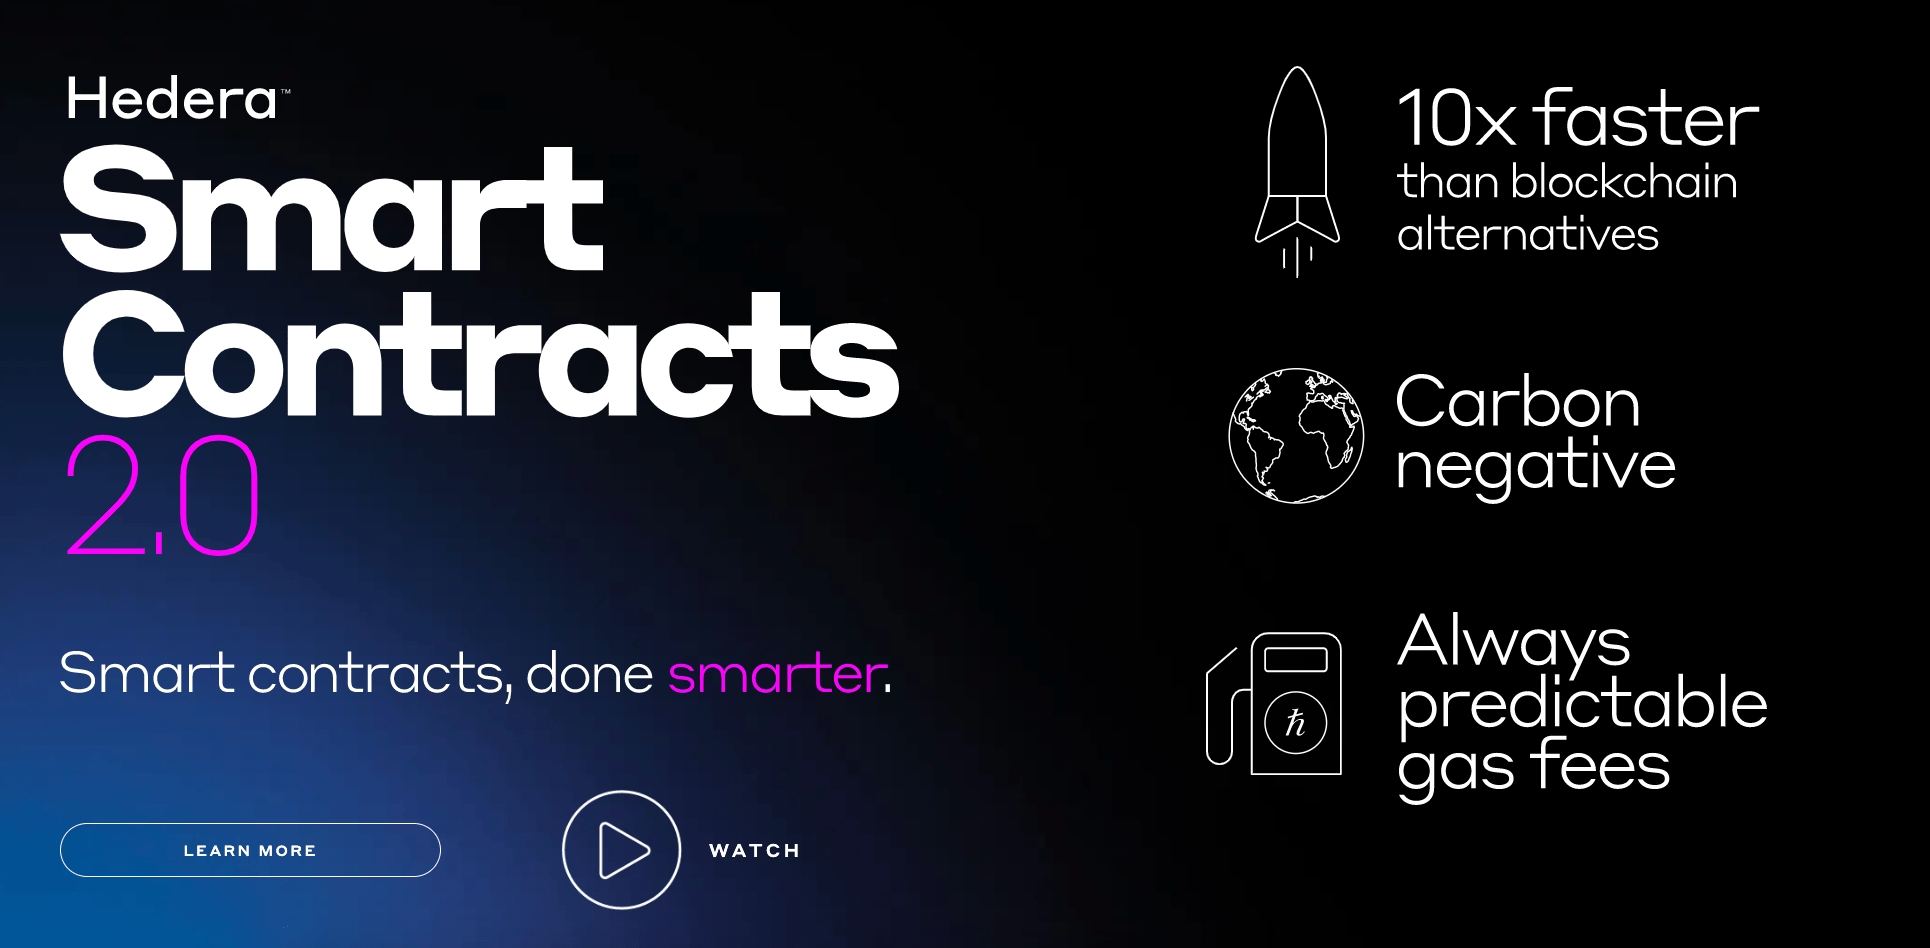 Hedera smart contracts